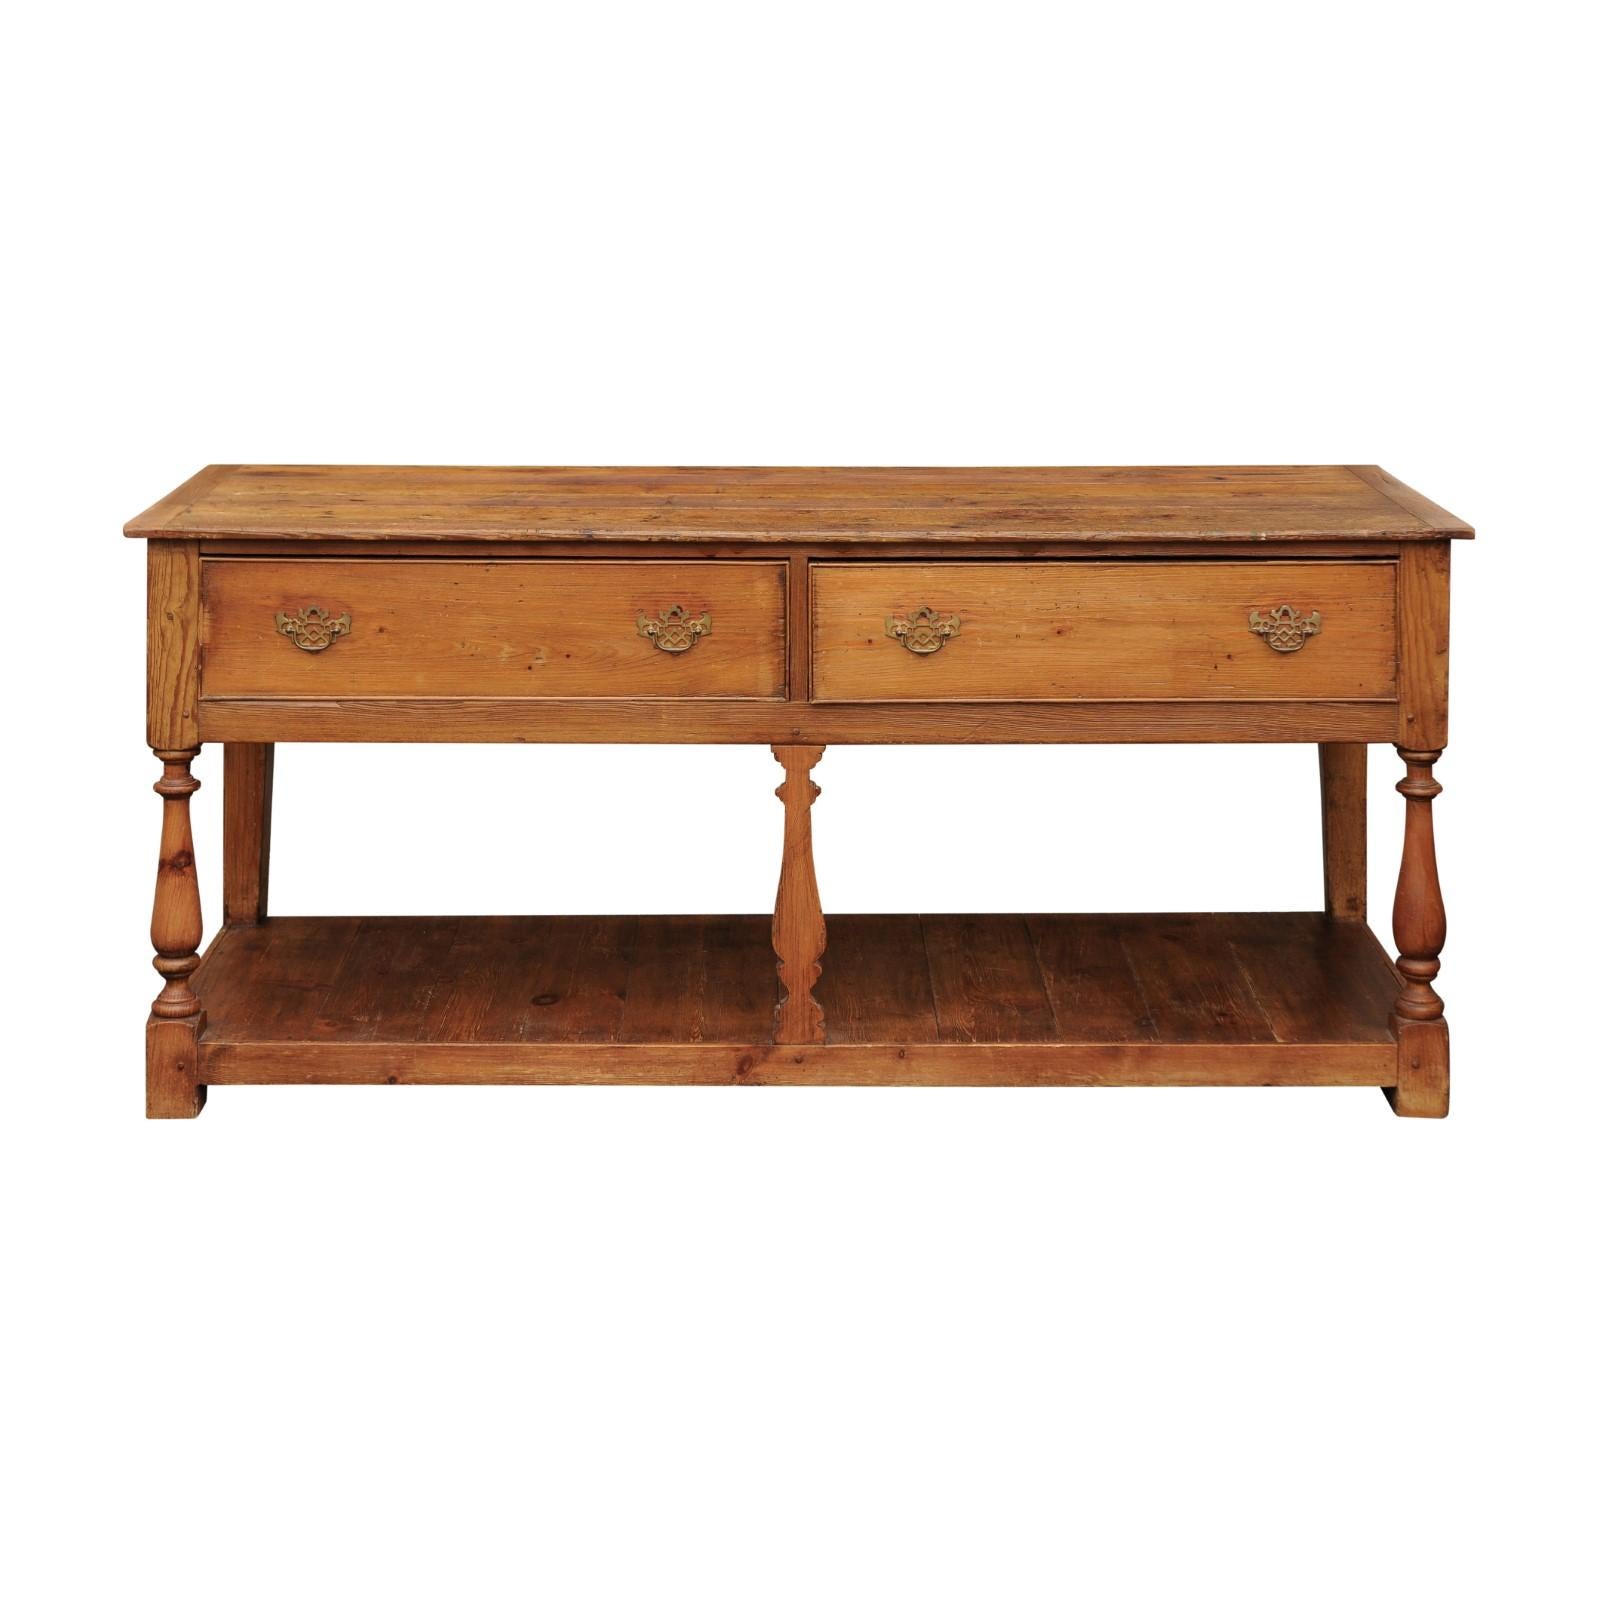 English Pine Low Dresser with Drawers, Baluster Legs and Potboard, circa 1880